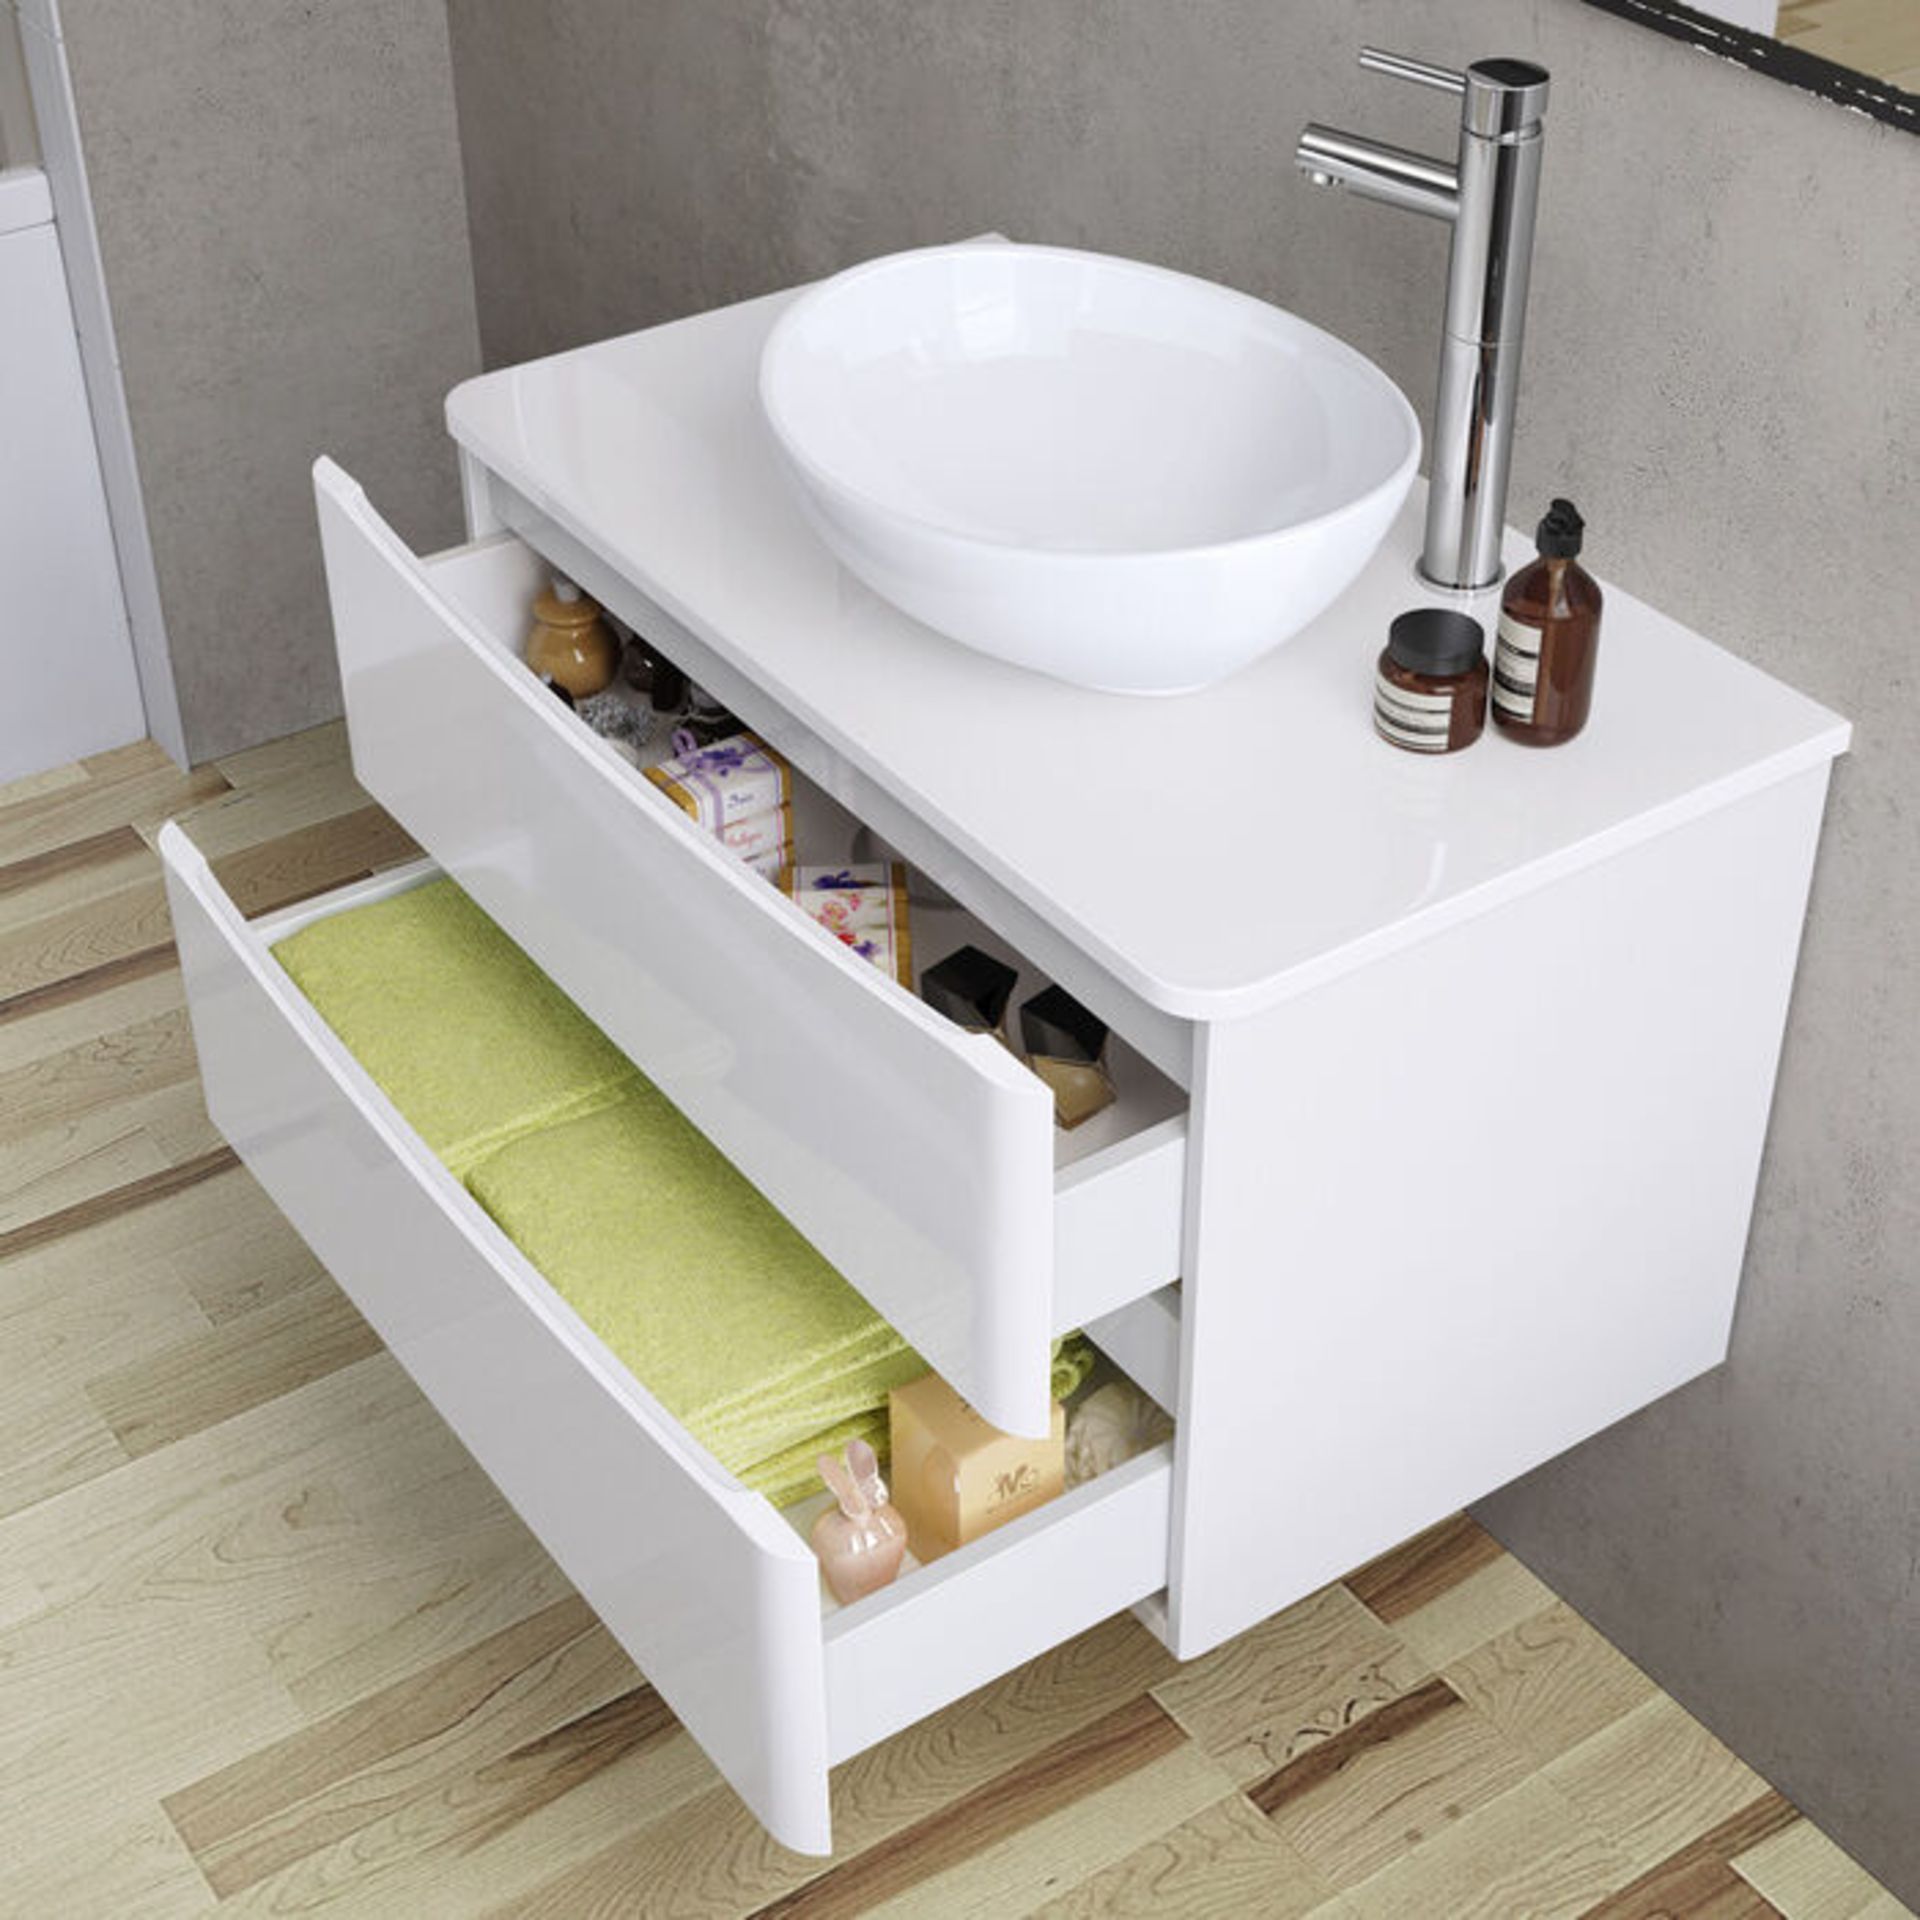 NEW & BOXED 1000mm Austin II Gloss White Countertop Unit and Camila Basin - Wall Hung. RRP £9... - Image 3 of 3